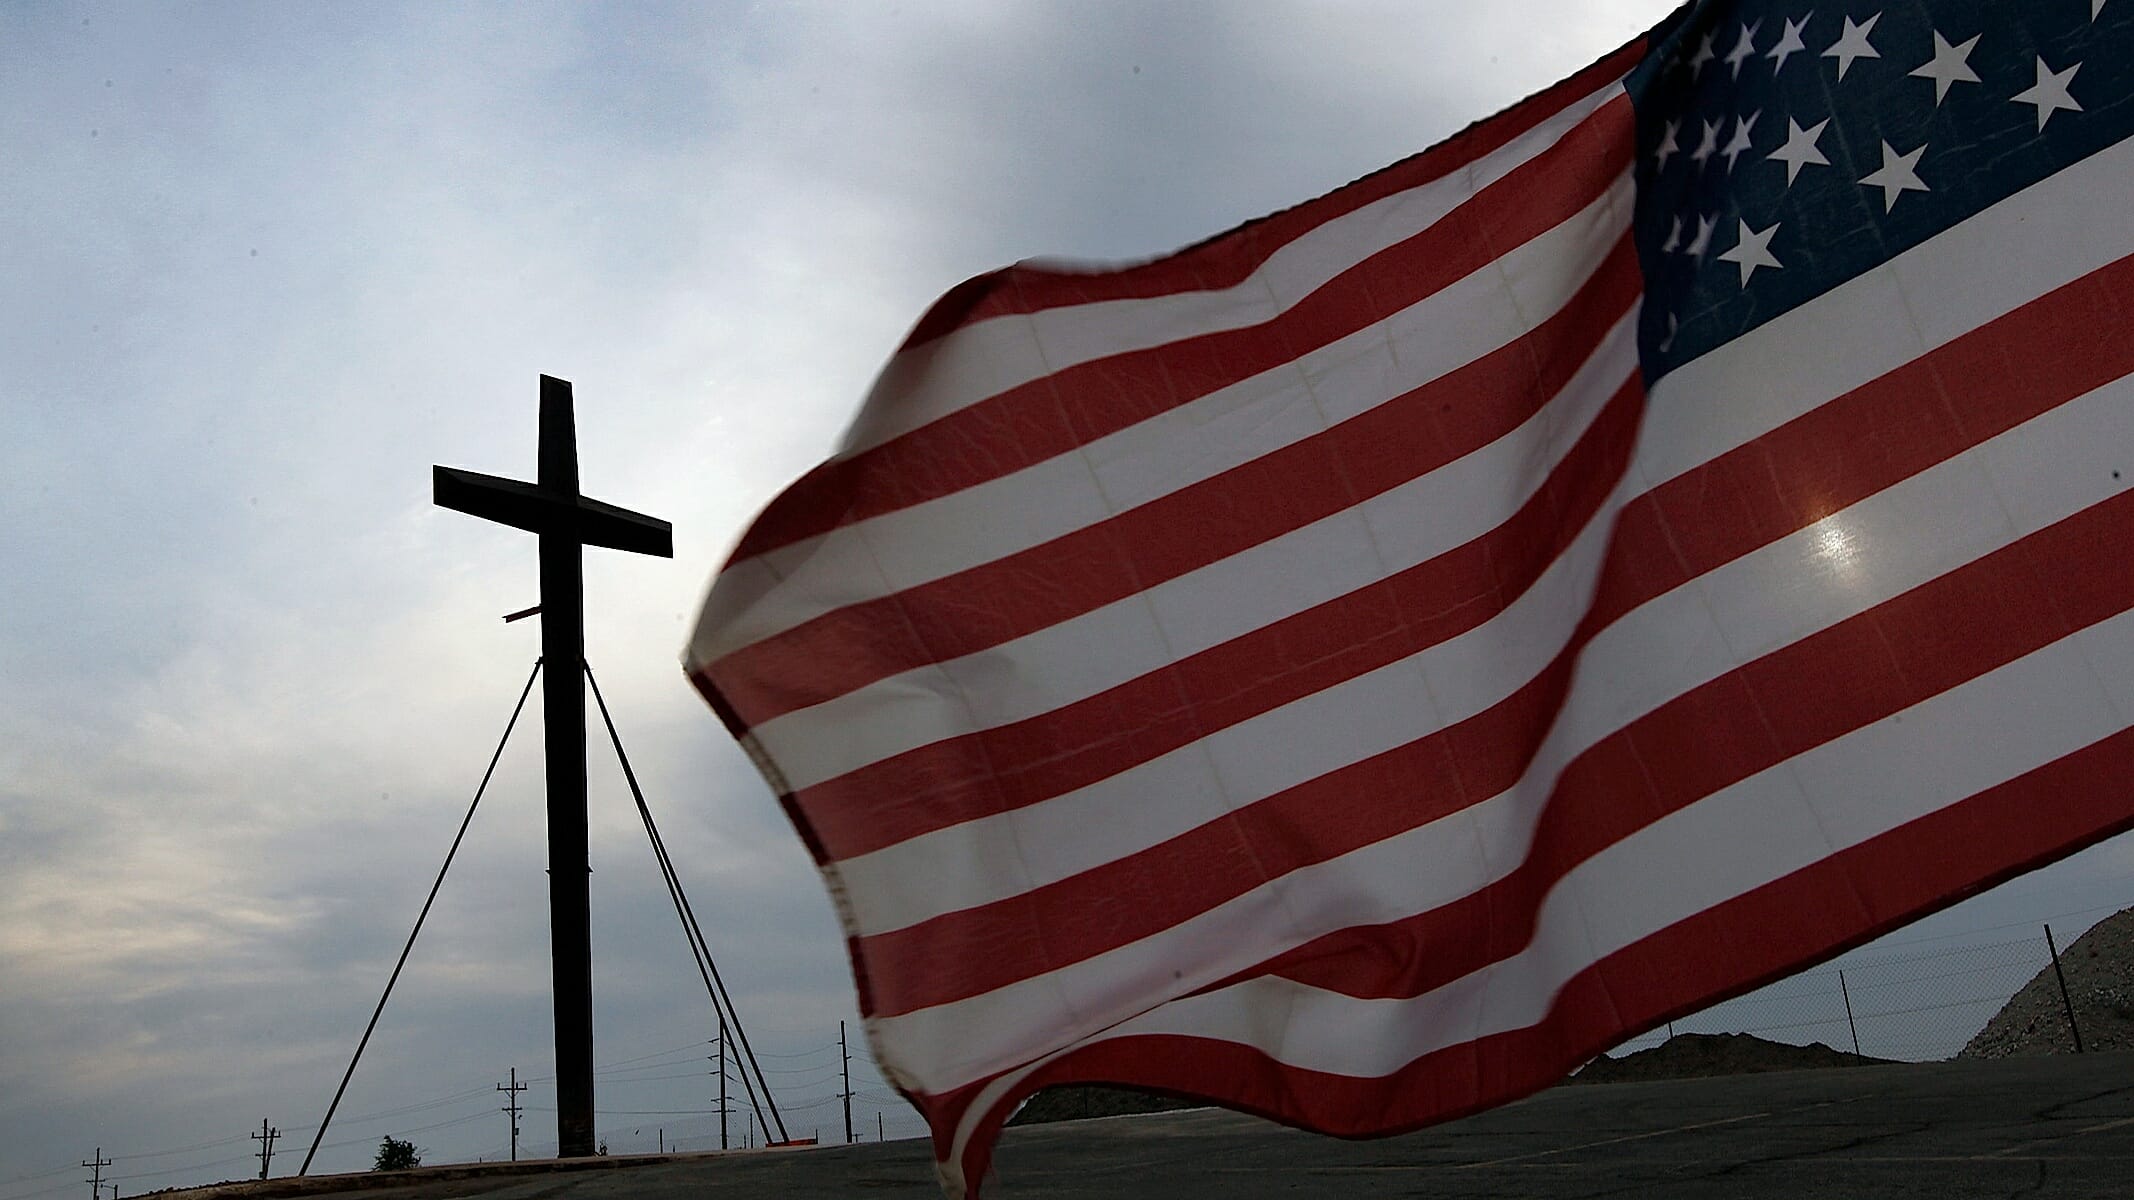 I’m a Former Evangelical Christian, and I’m Disturbed by Their Indifference to Refugees